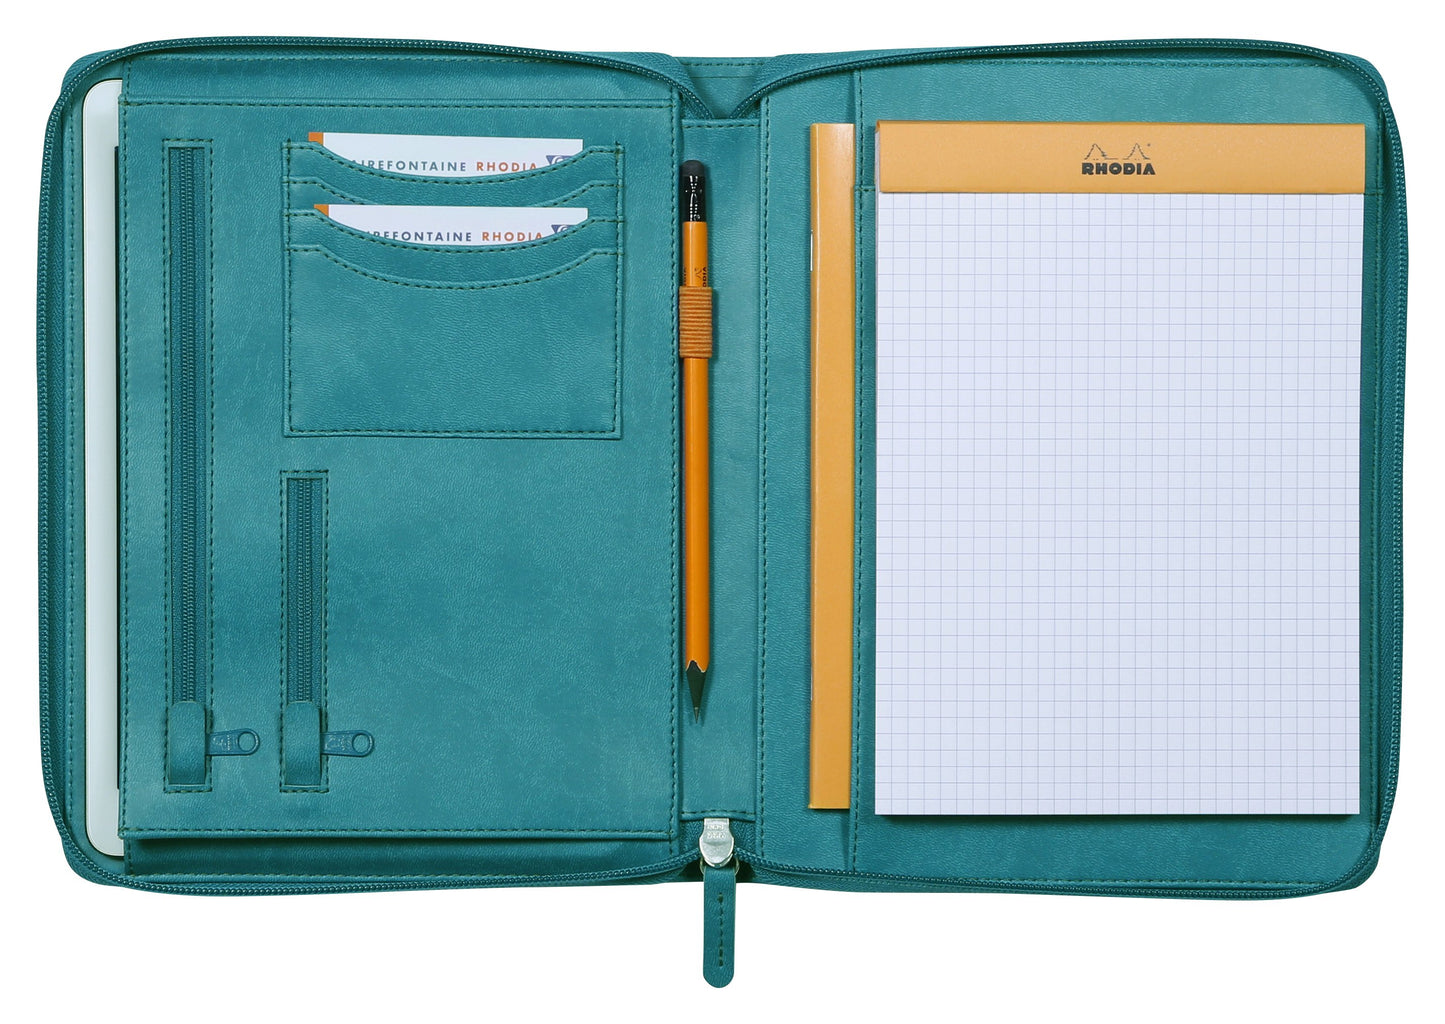 An A4 Portfolio Case in Peacock from the Pencil Me In stationery shop.